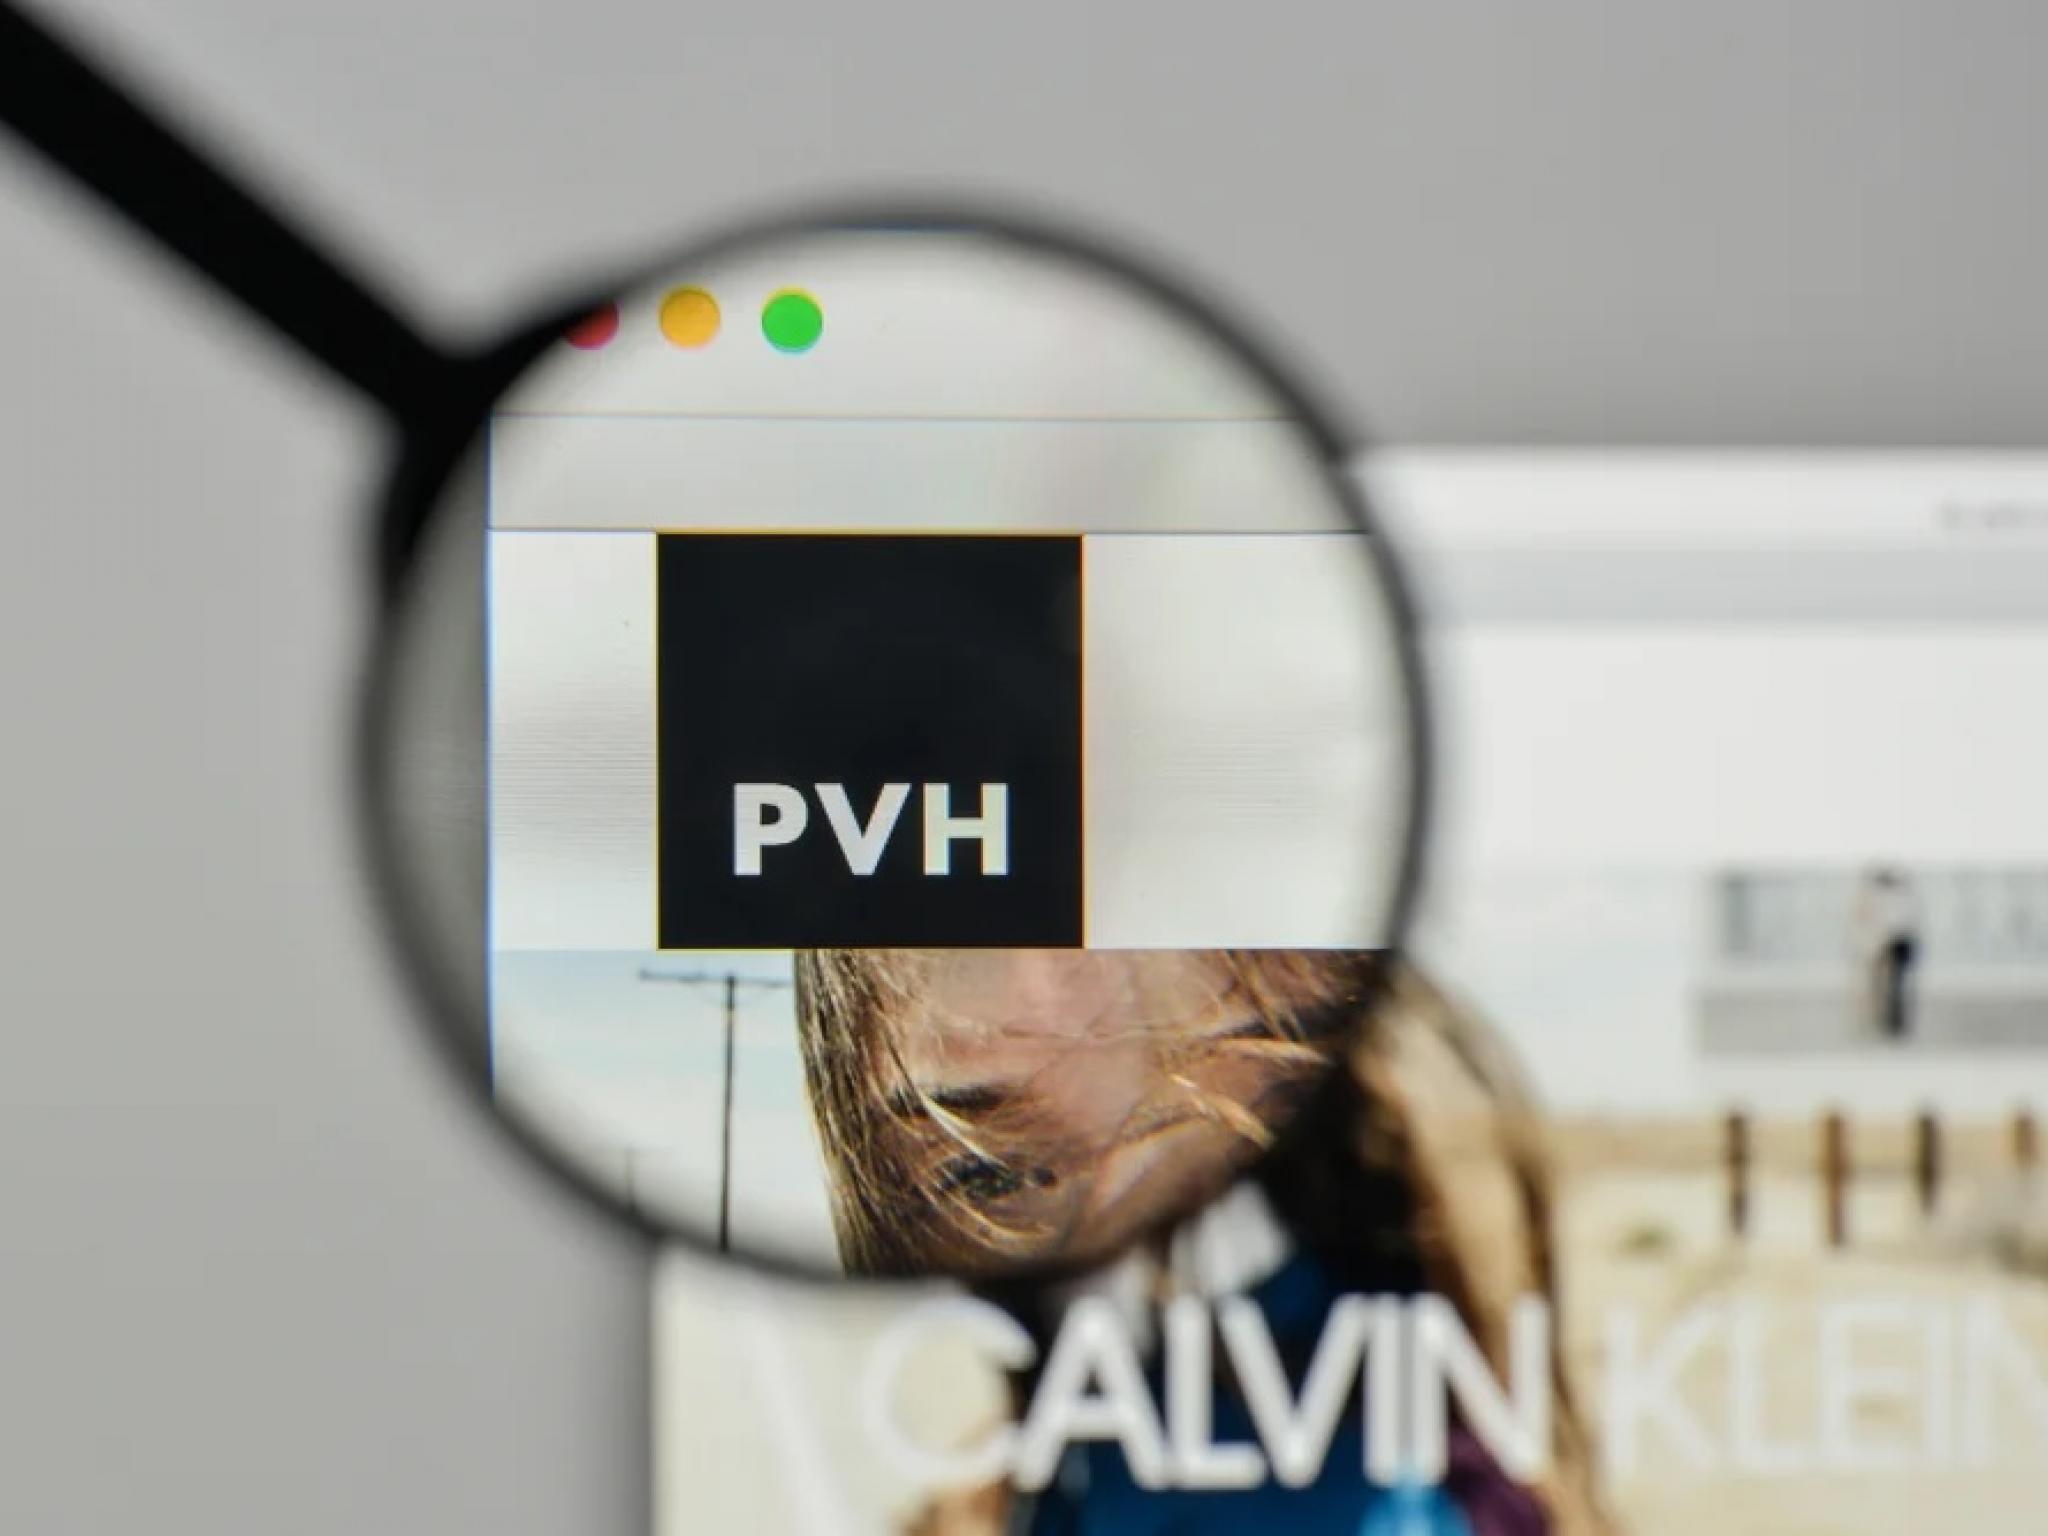  how-to-earn-500-a-month-from-pvh-stock-ahead-of-q1-earnings-report 